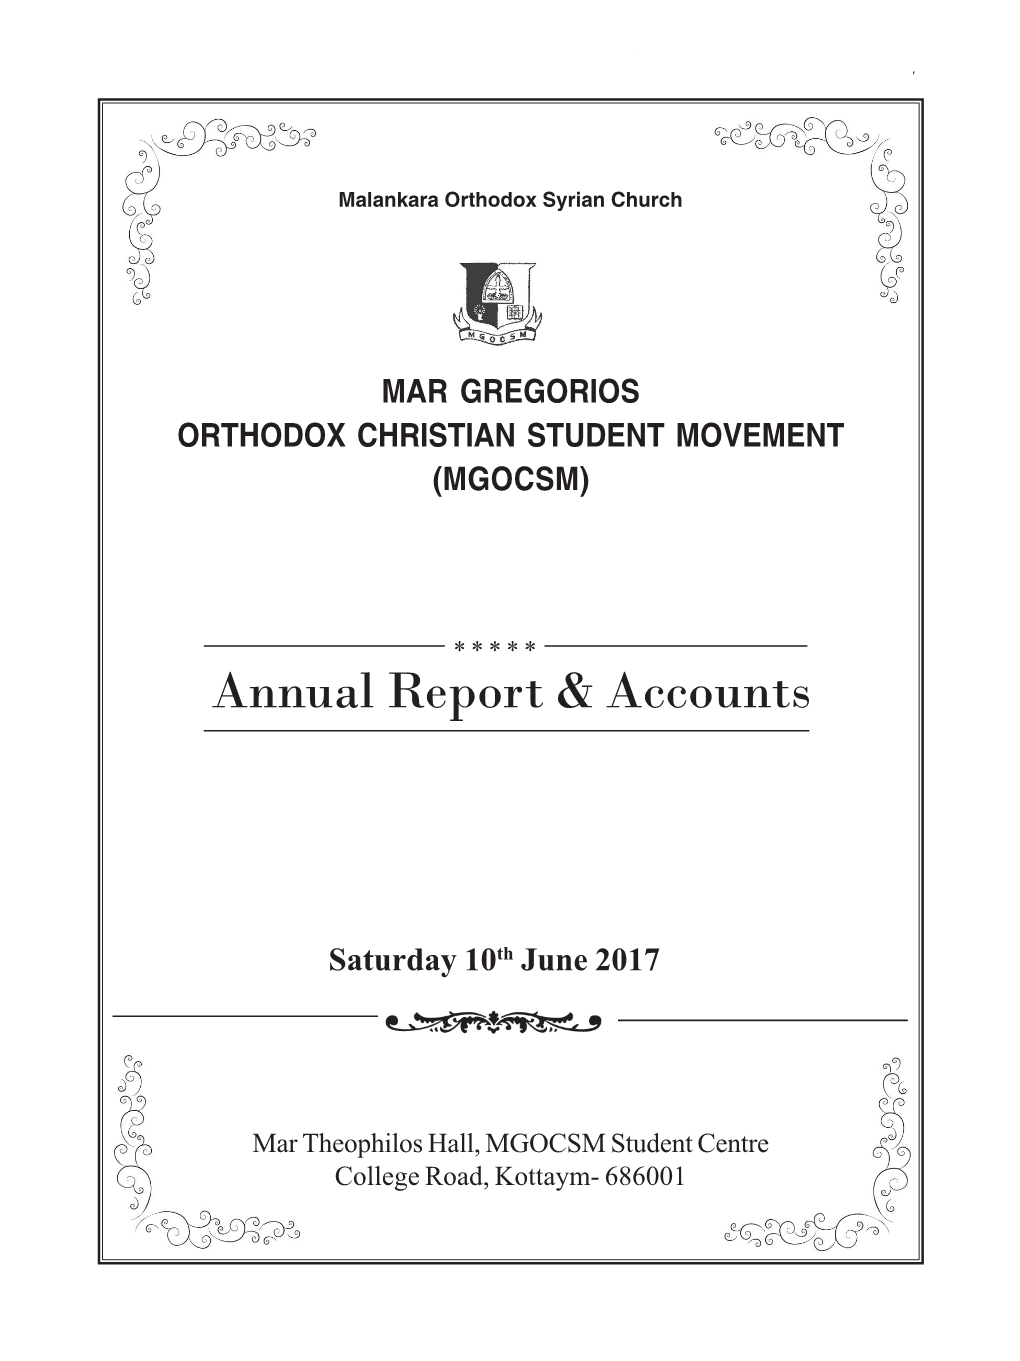 MGOCSM Annual Report.Pmd